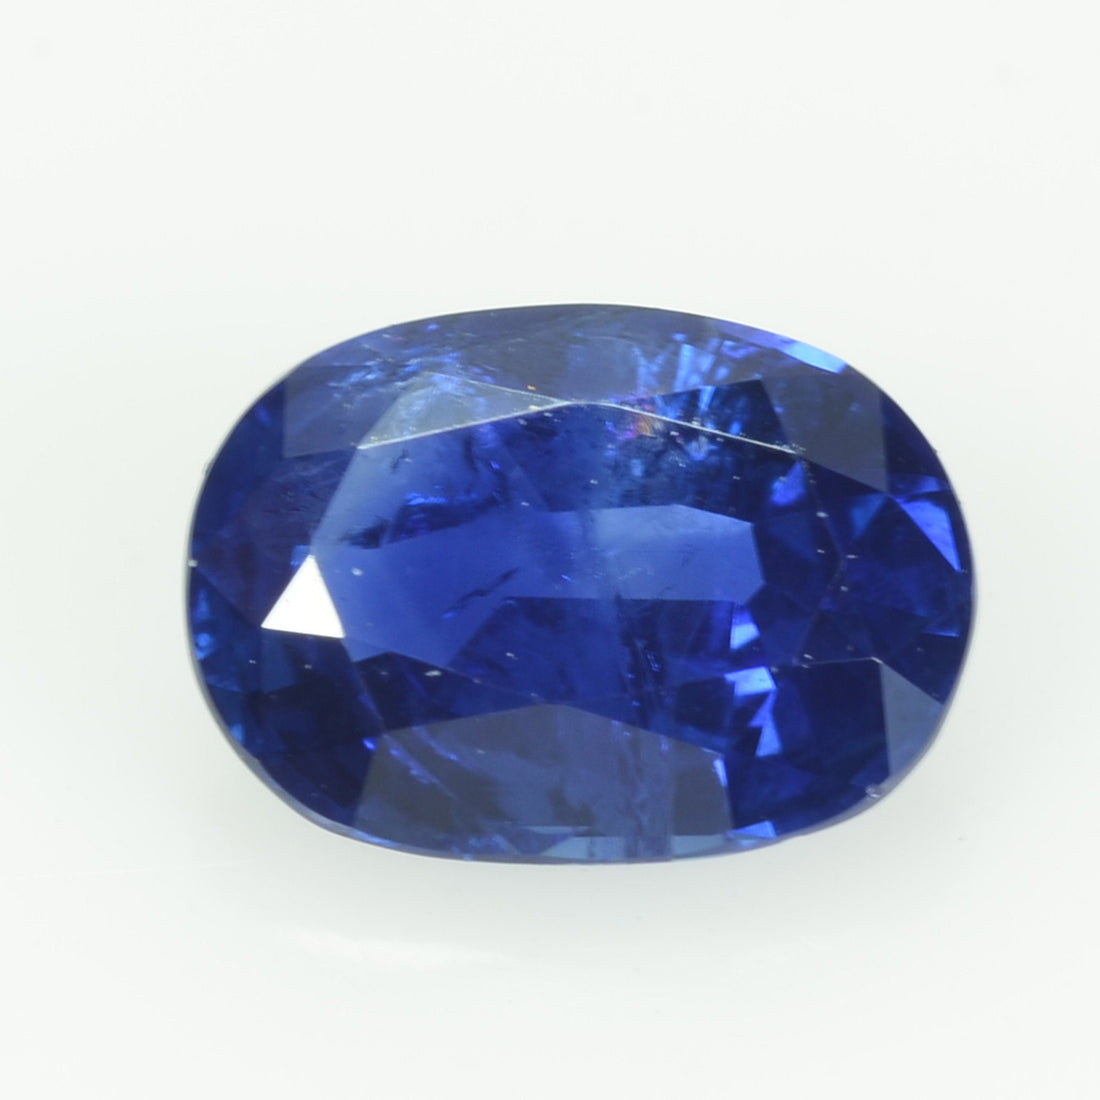 1.10 cts natural blue sapphire loose gemstone oval cut AGL Certified